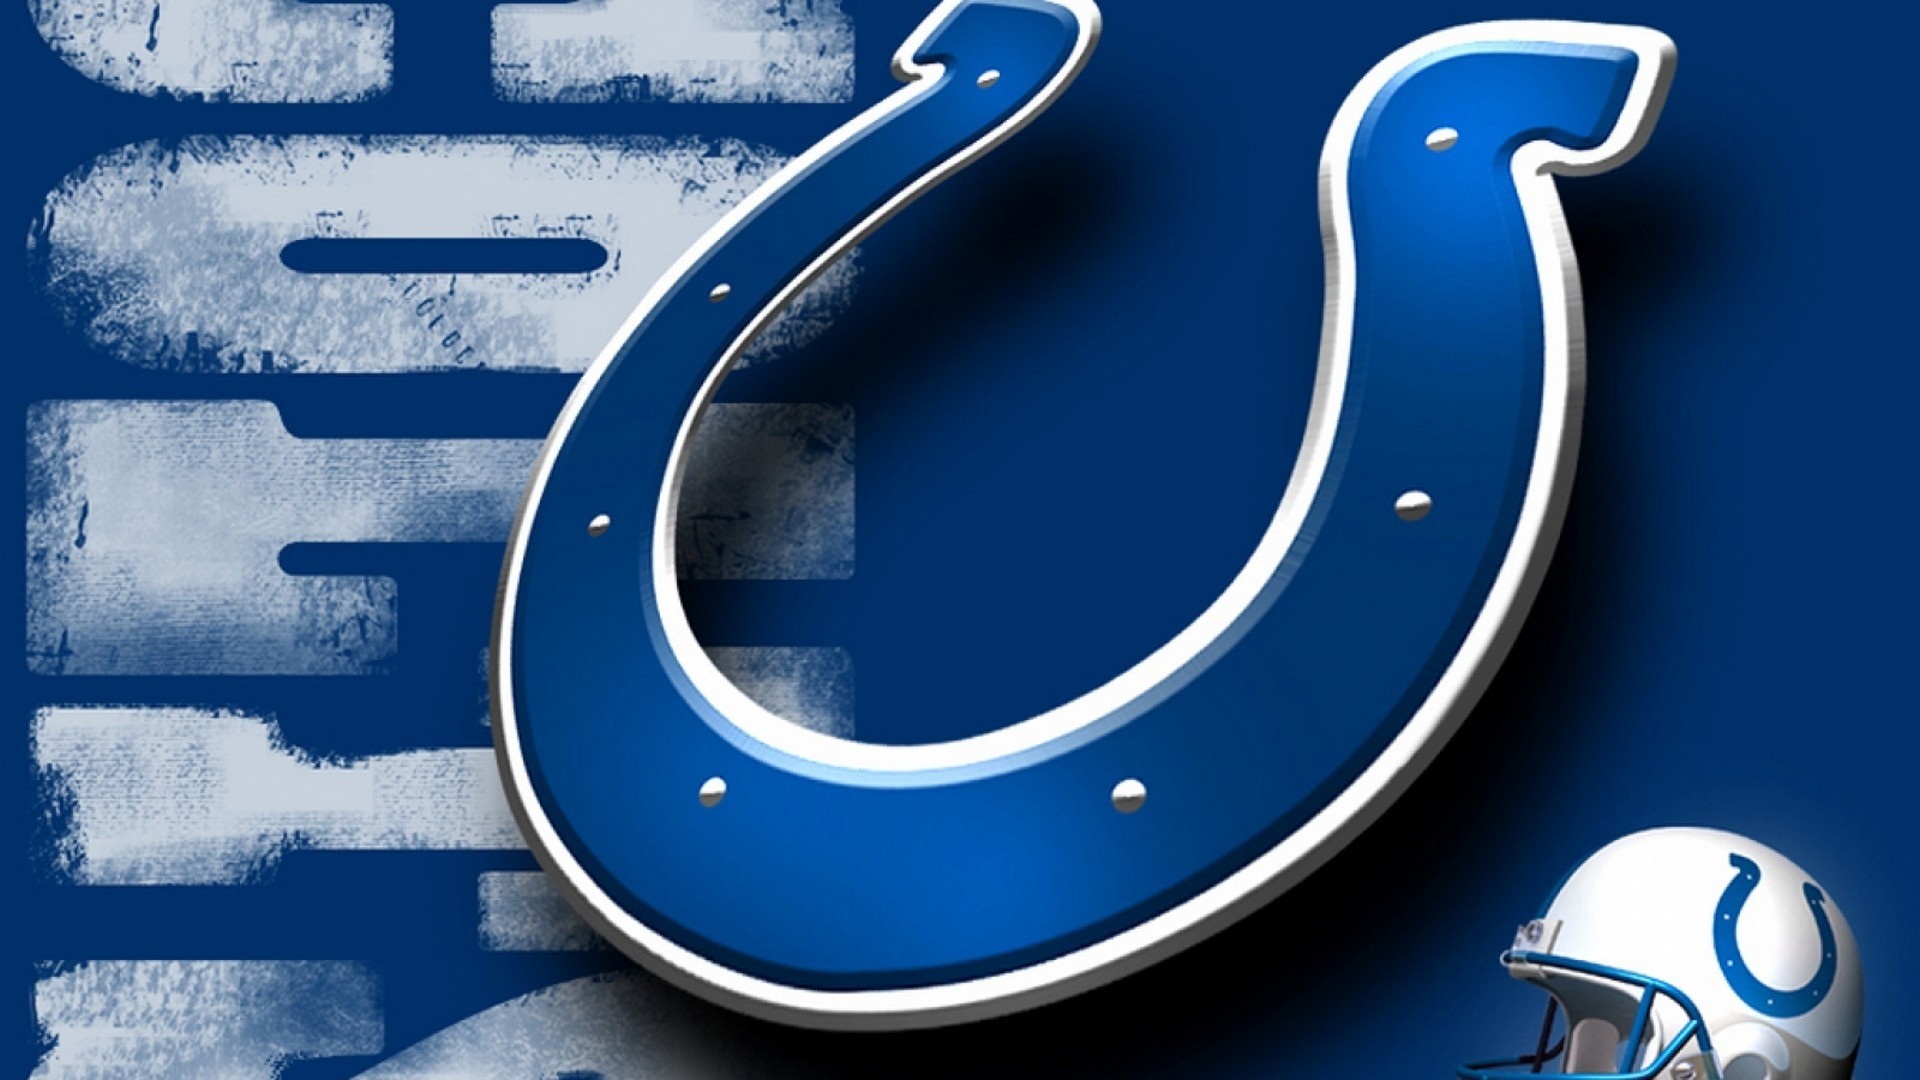 Colts Background Wallpaper